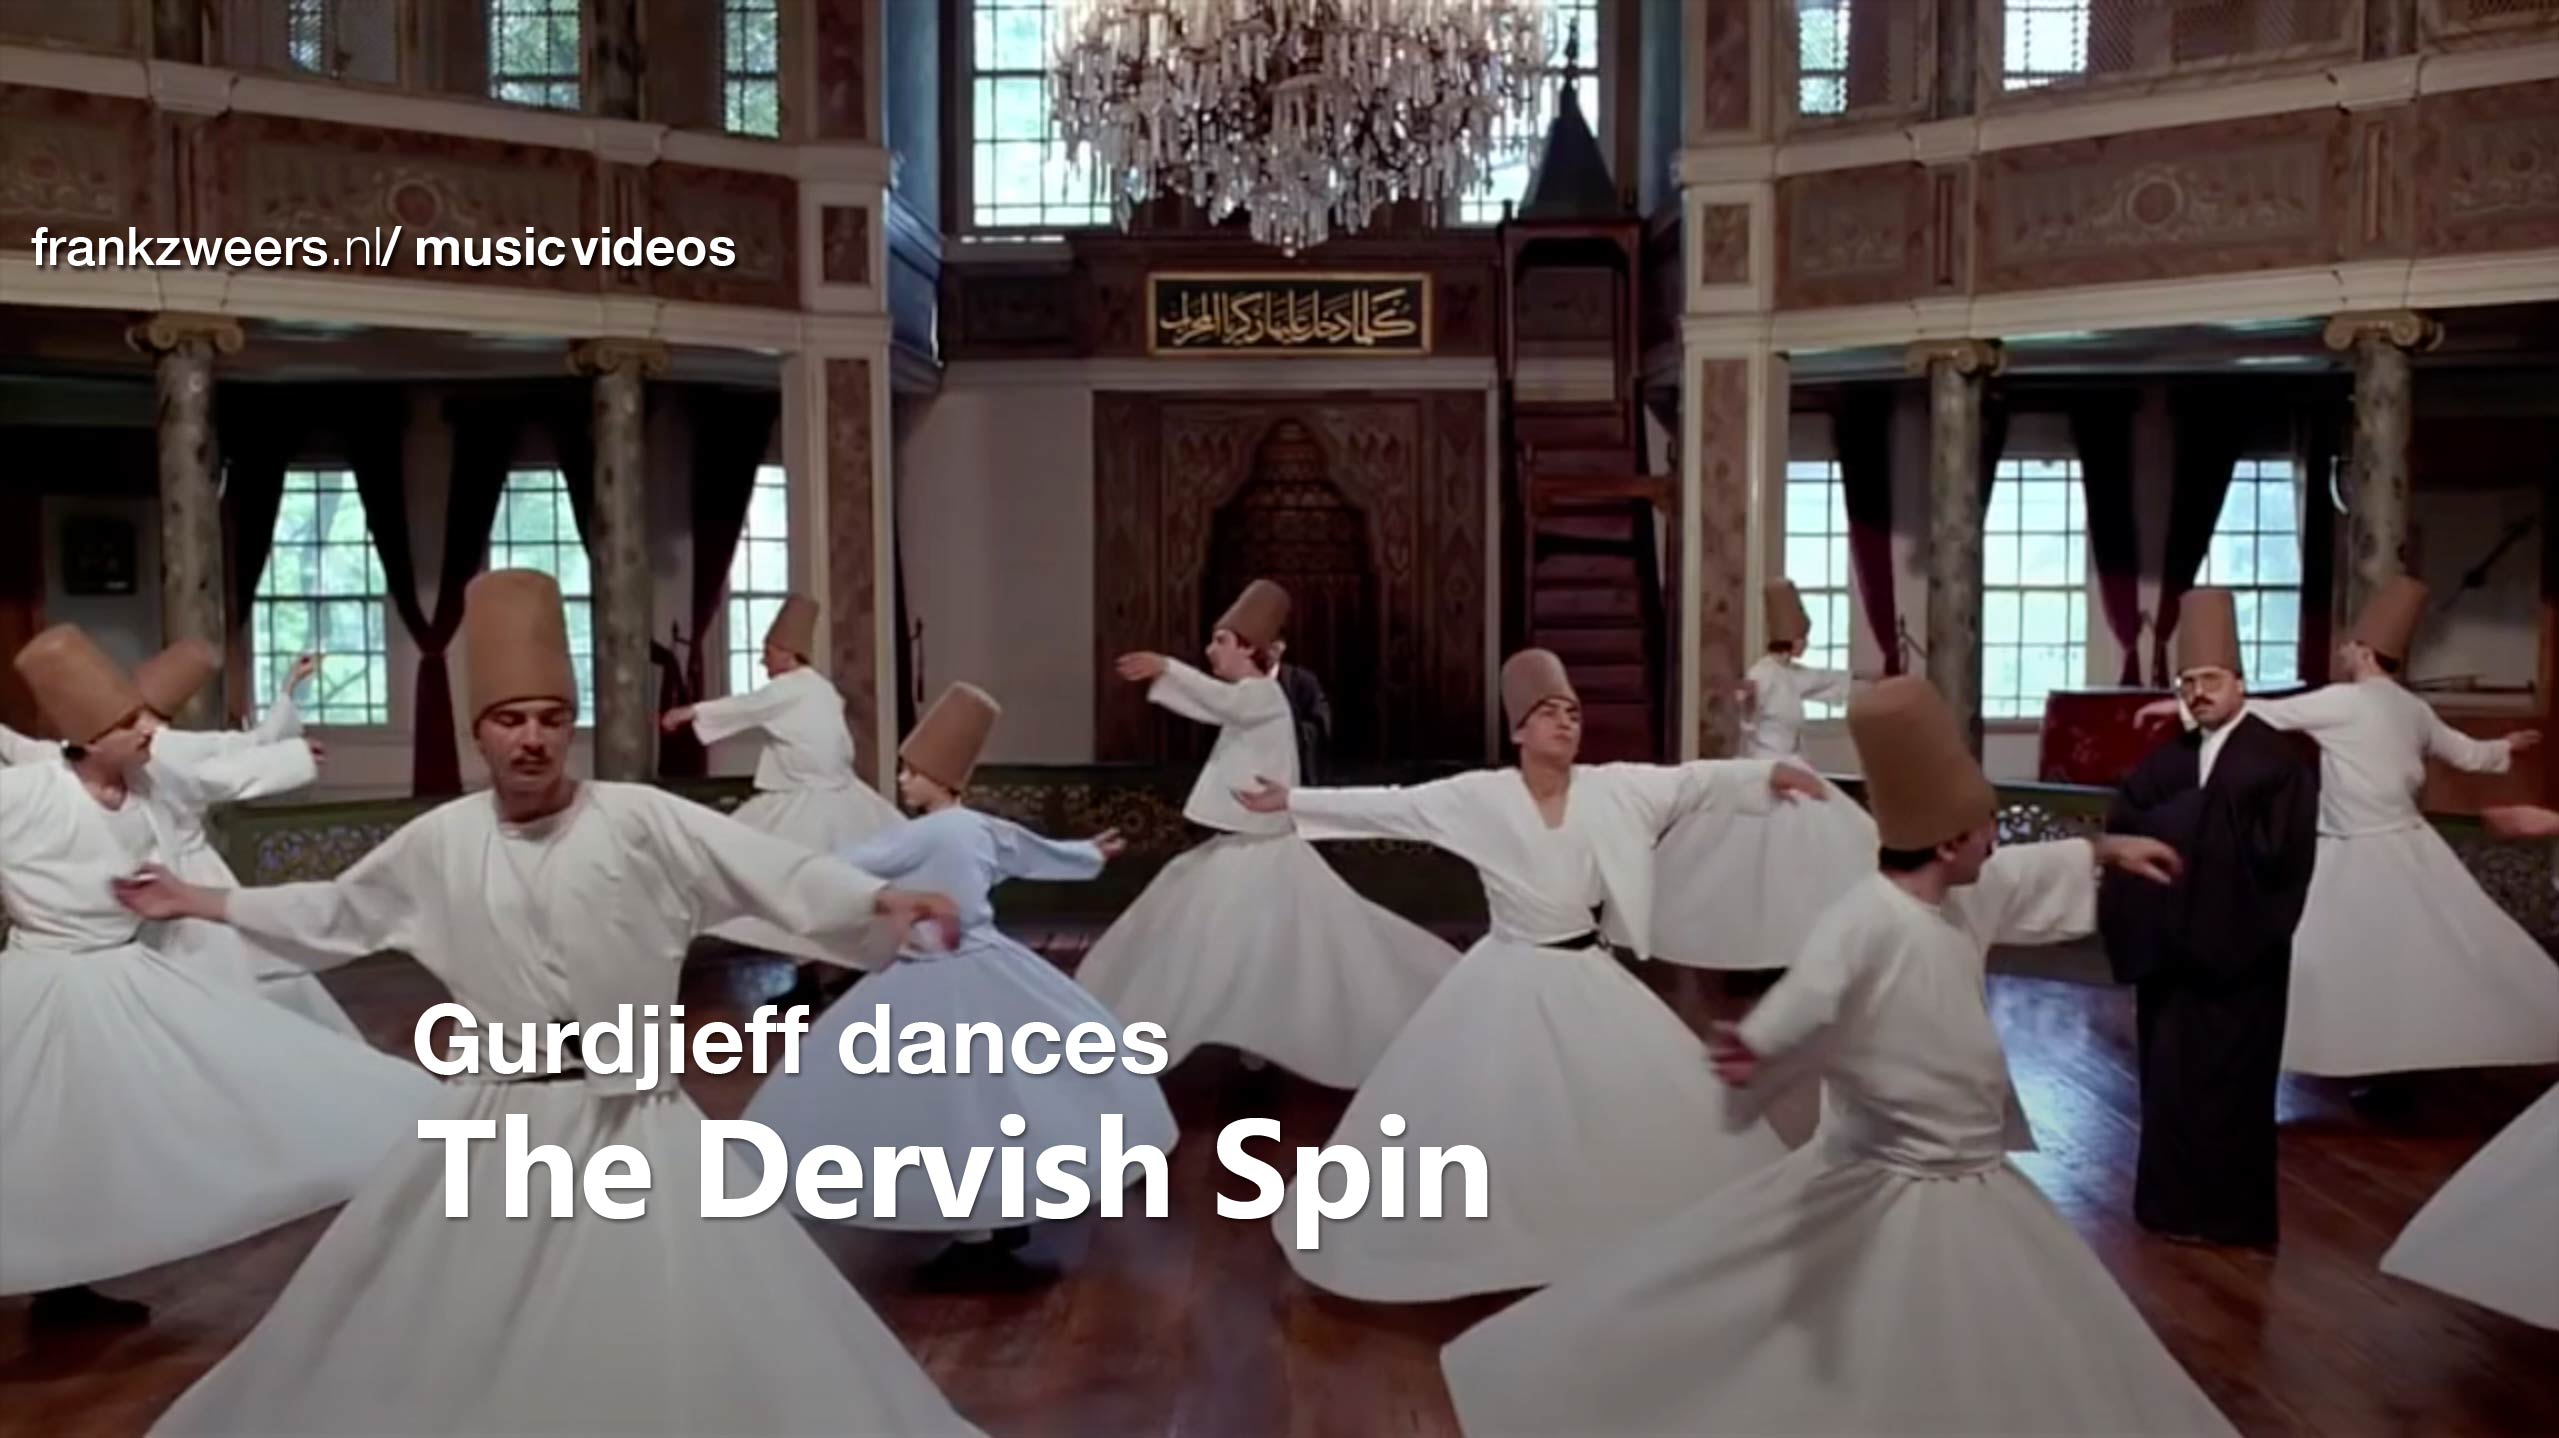 The Dervish spin | music video